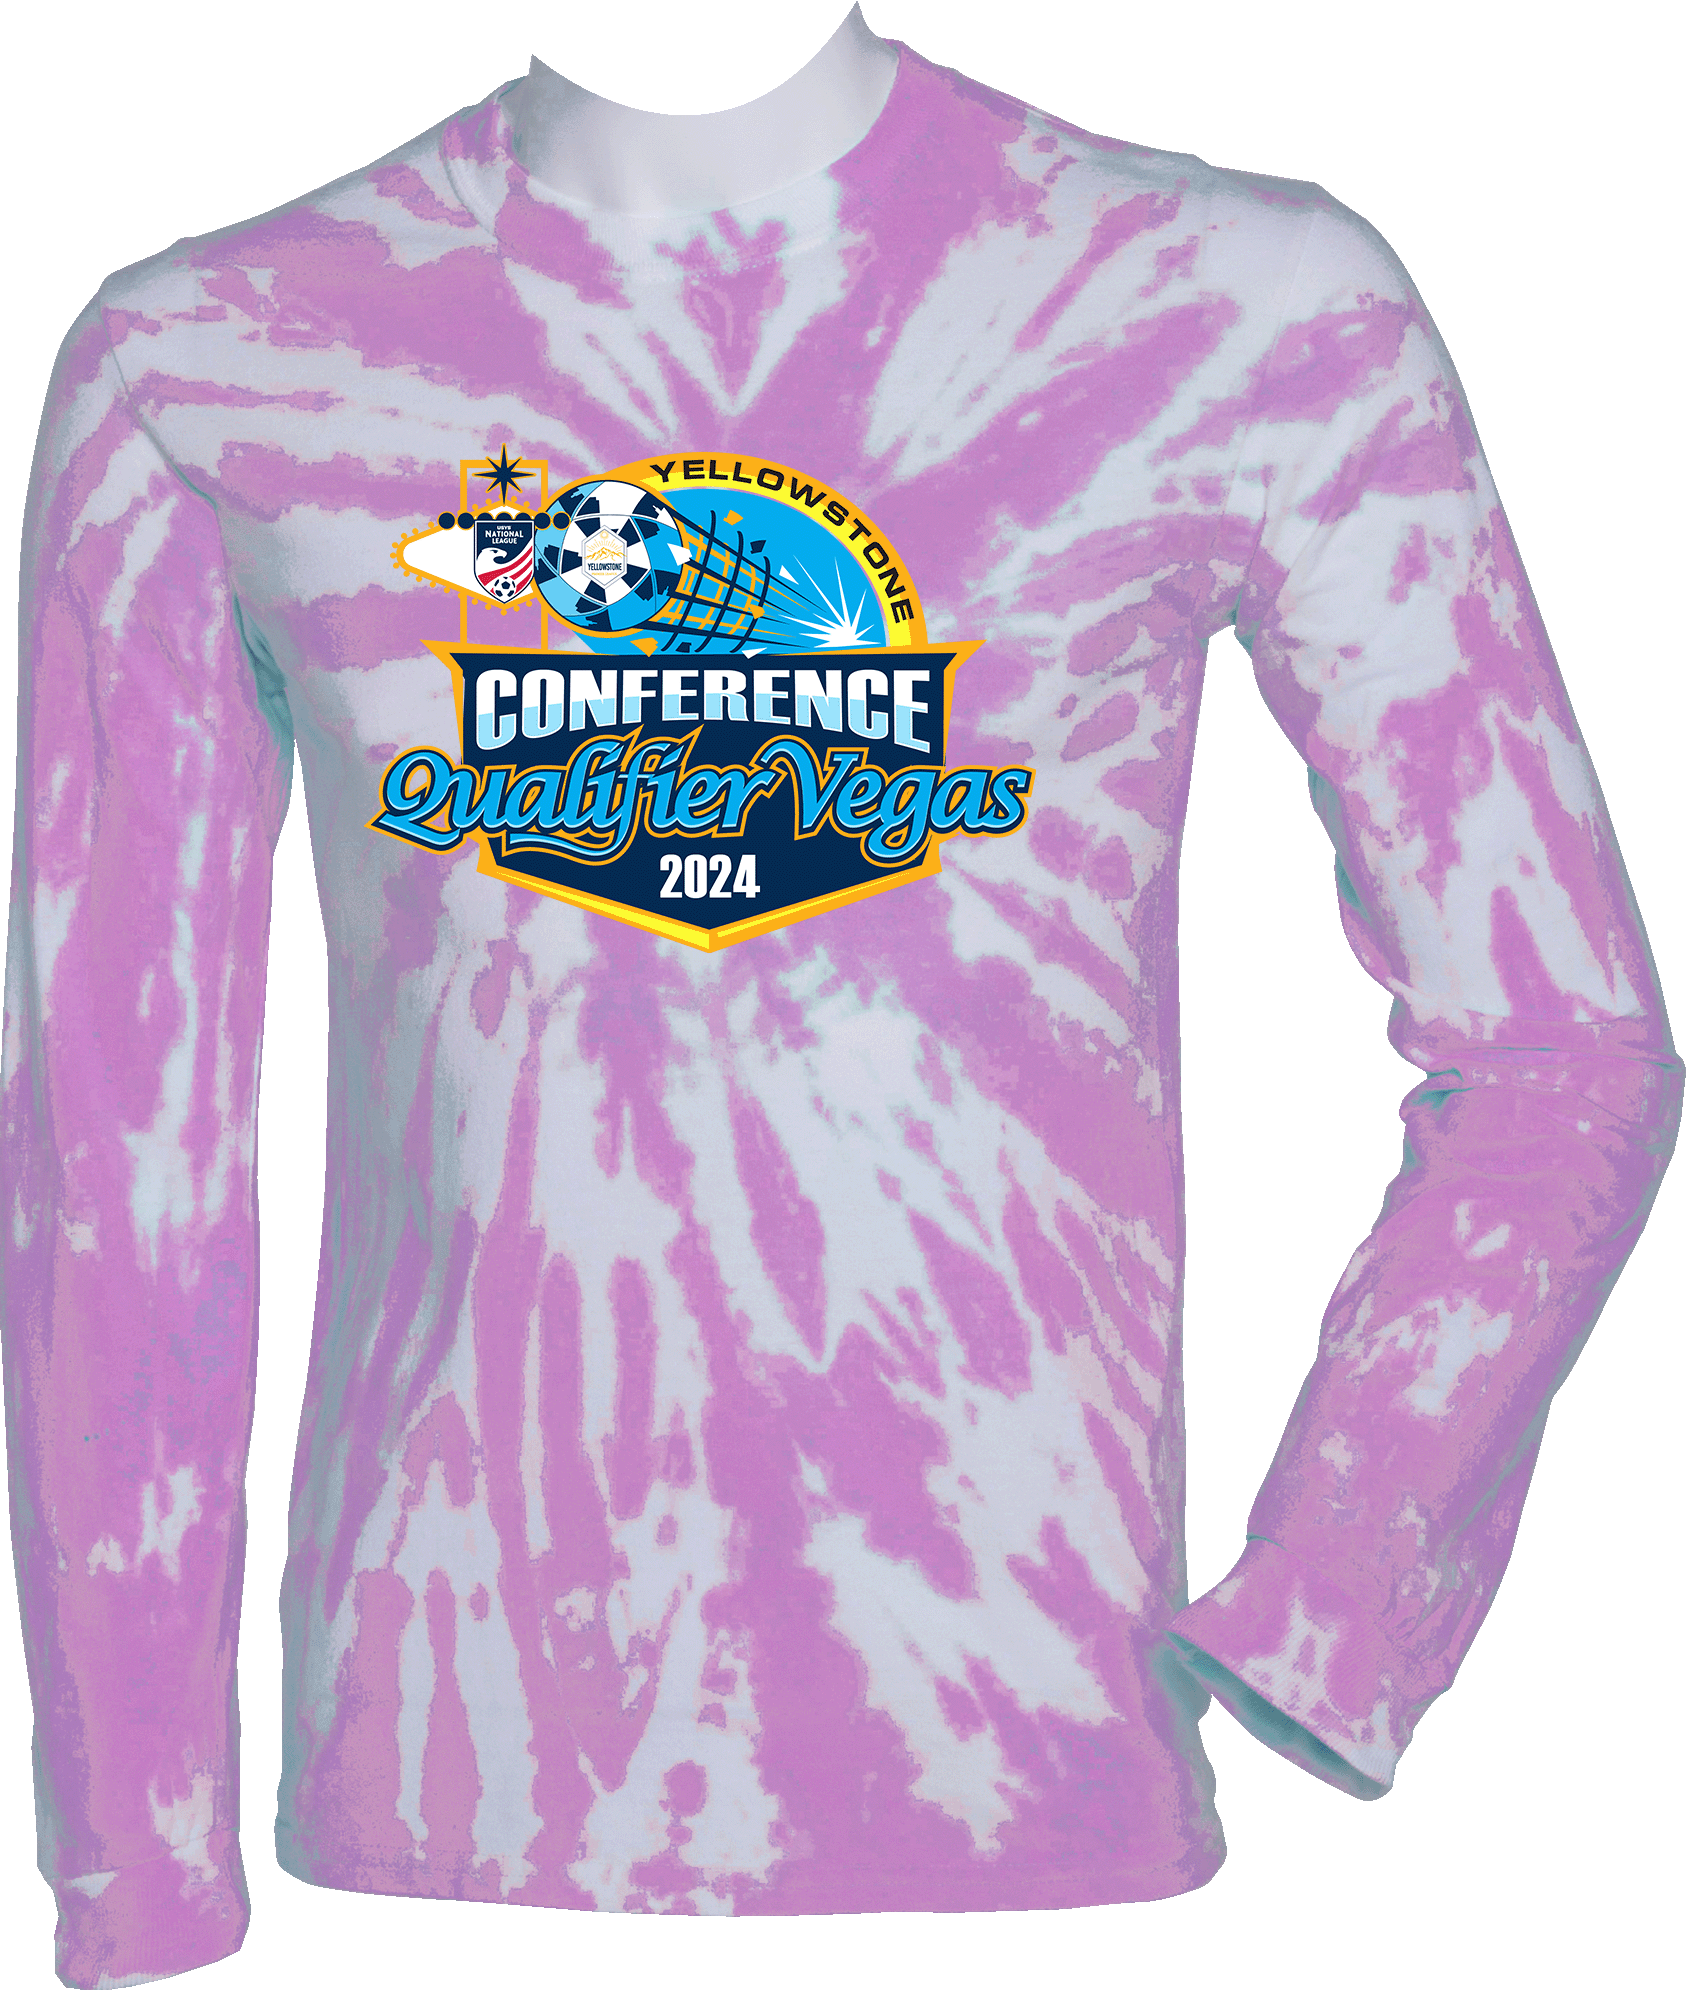 Tie-Dye Long Sleeves - 2024 Yellowstone Conference Qualifier Vegas